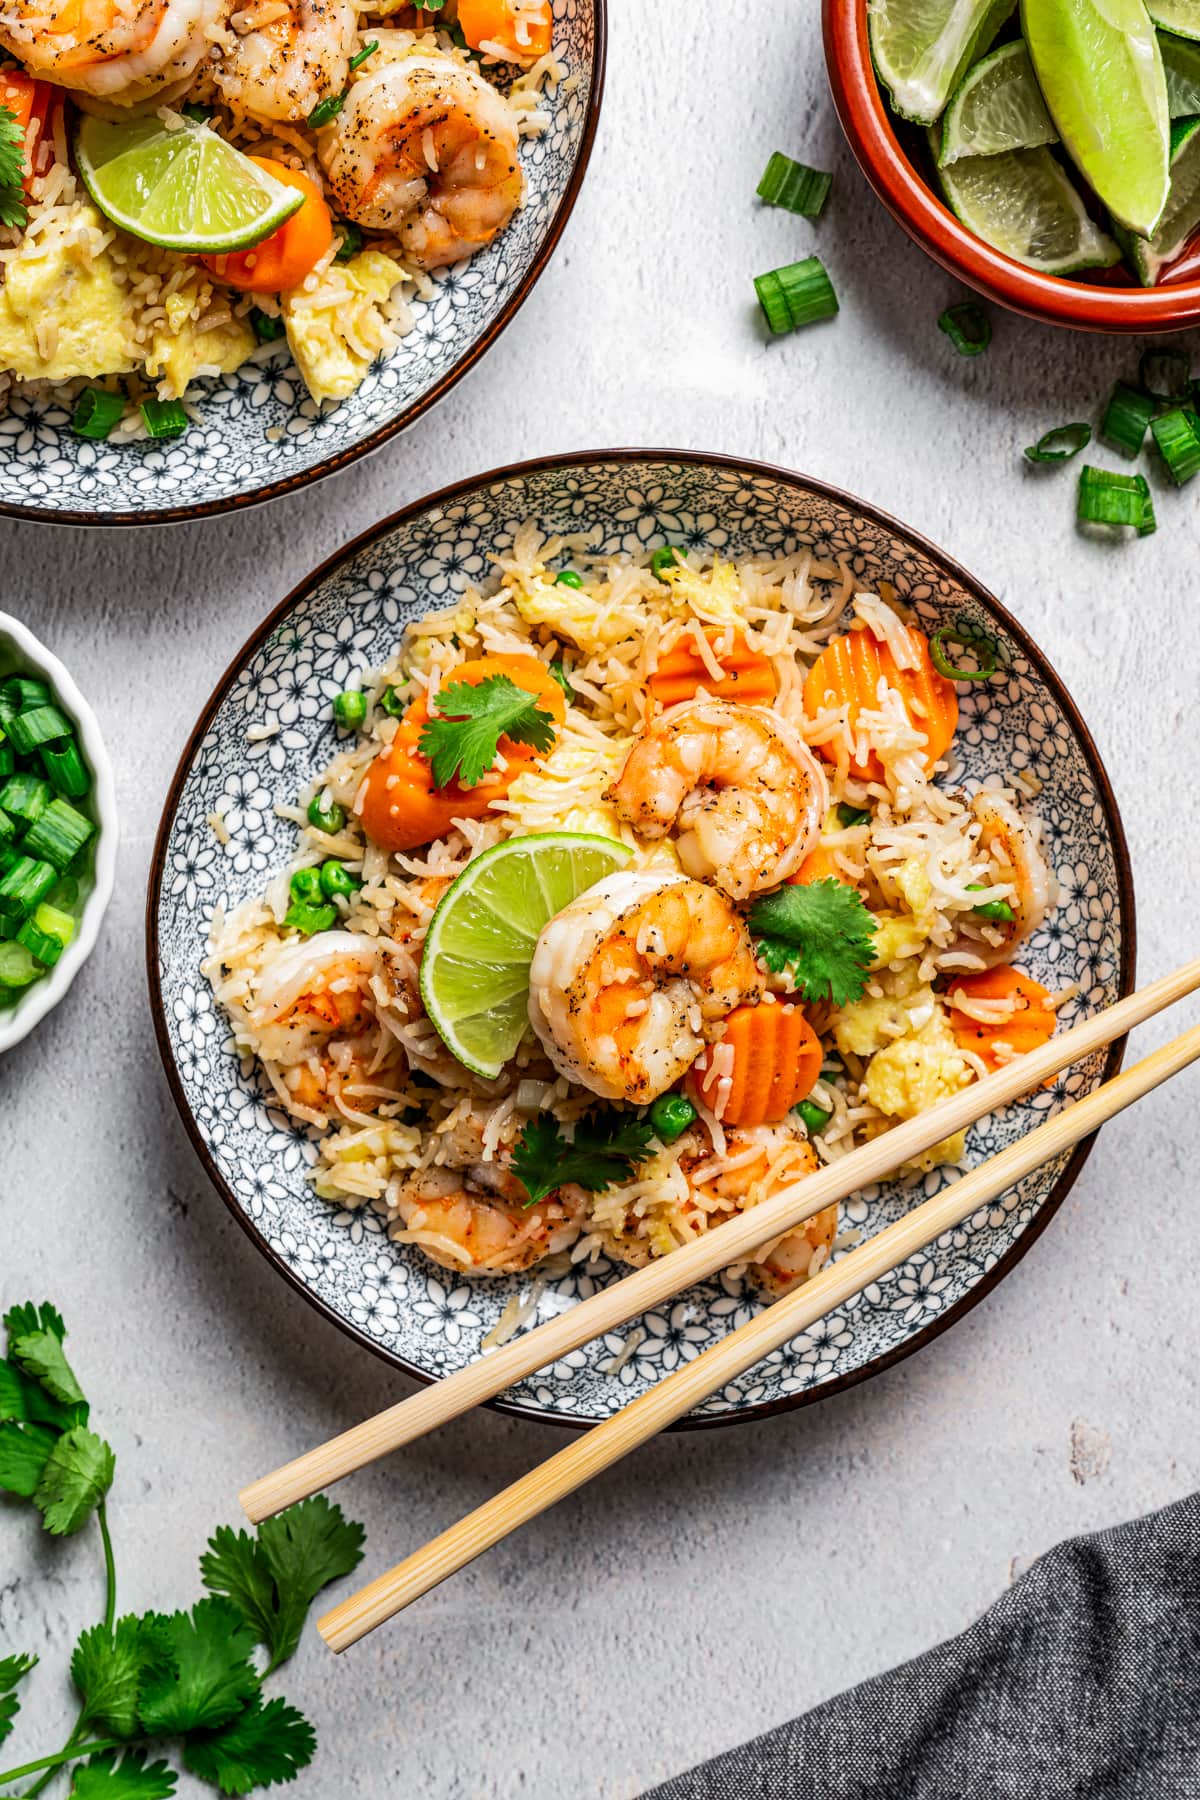 Shrimp fried rice served on dinner plates garnished with lime wedges, and a pair of chopsticks placed on the side of the plate.